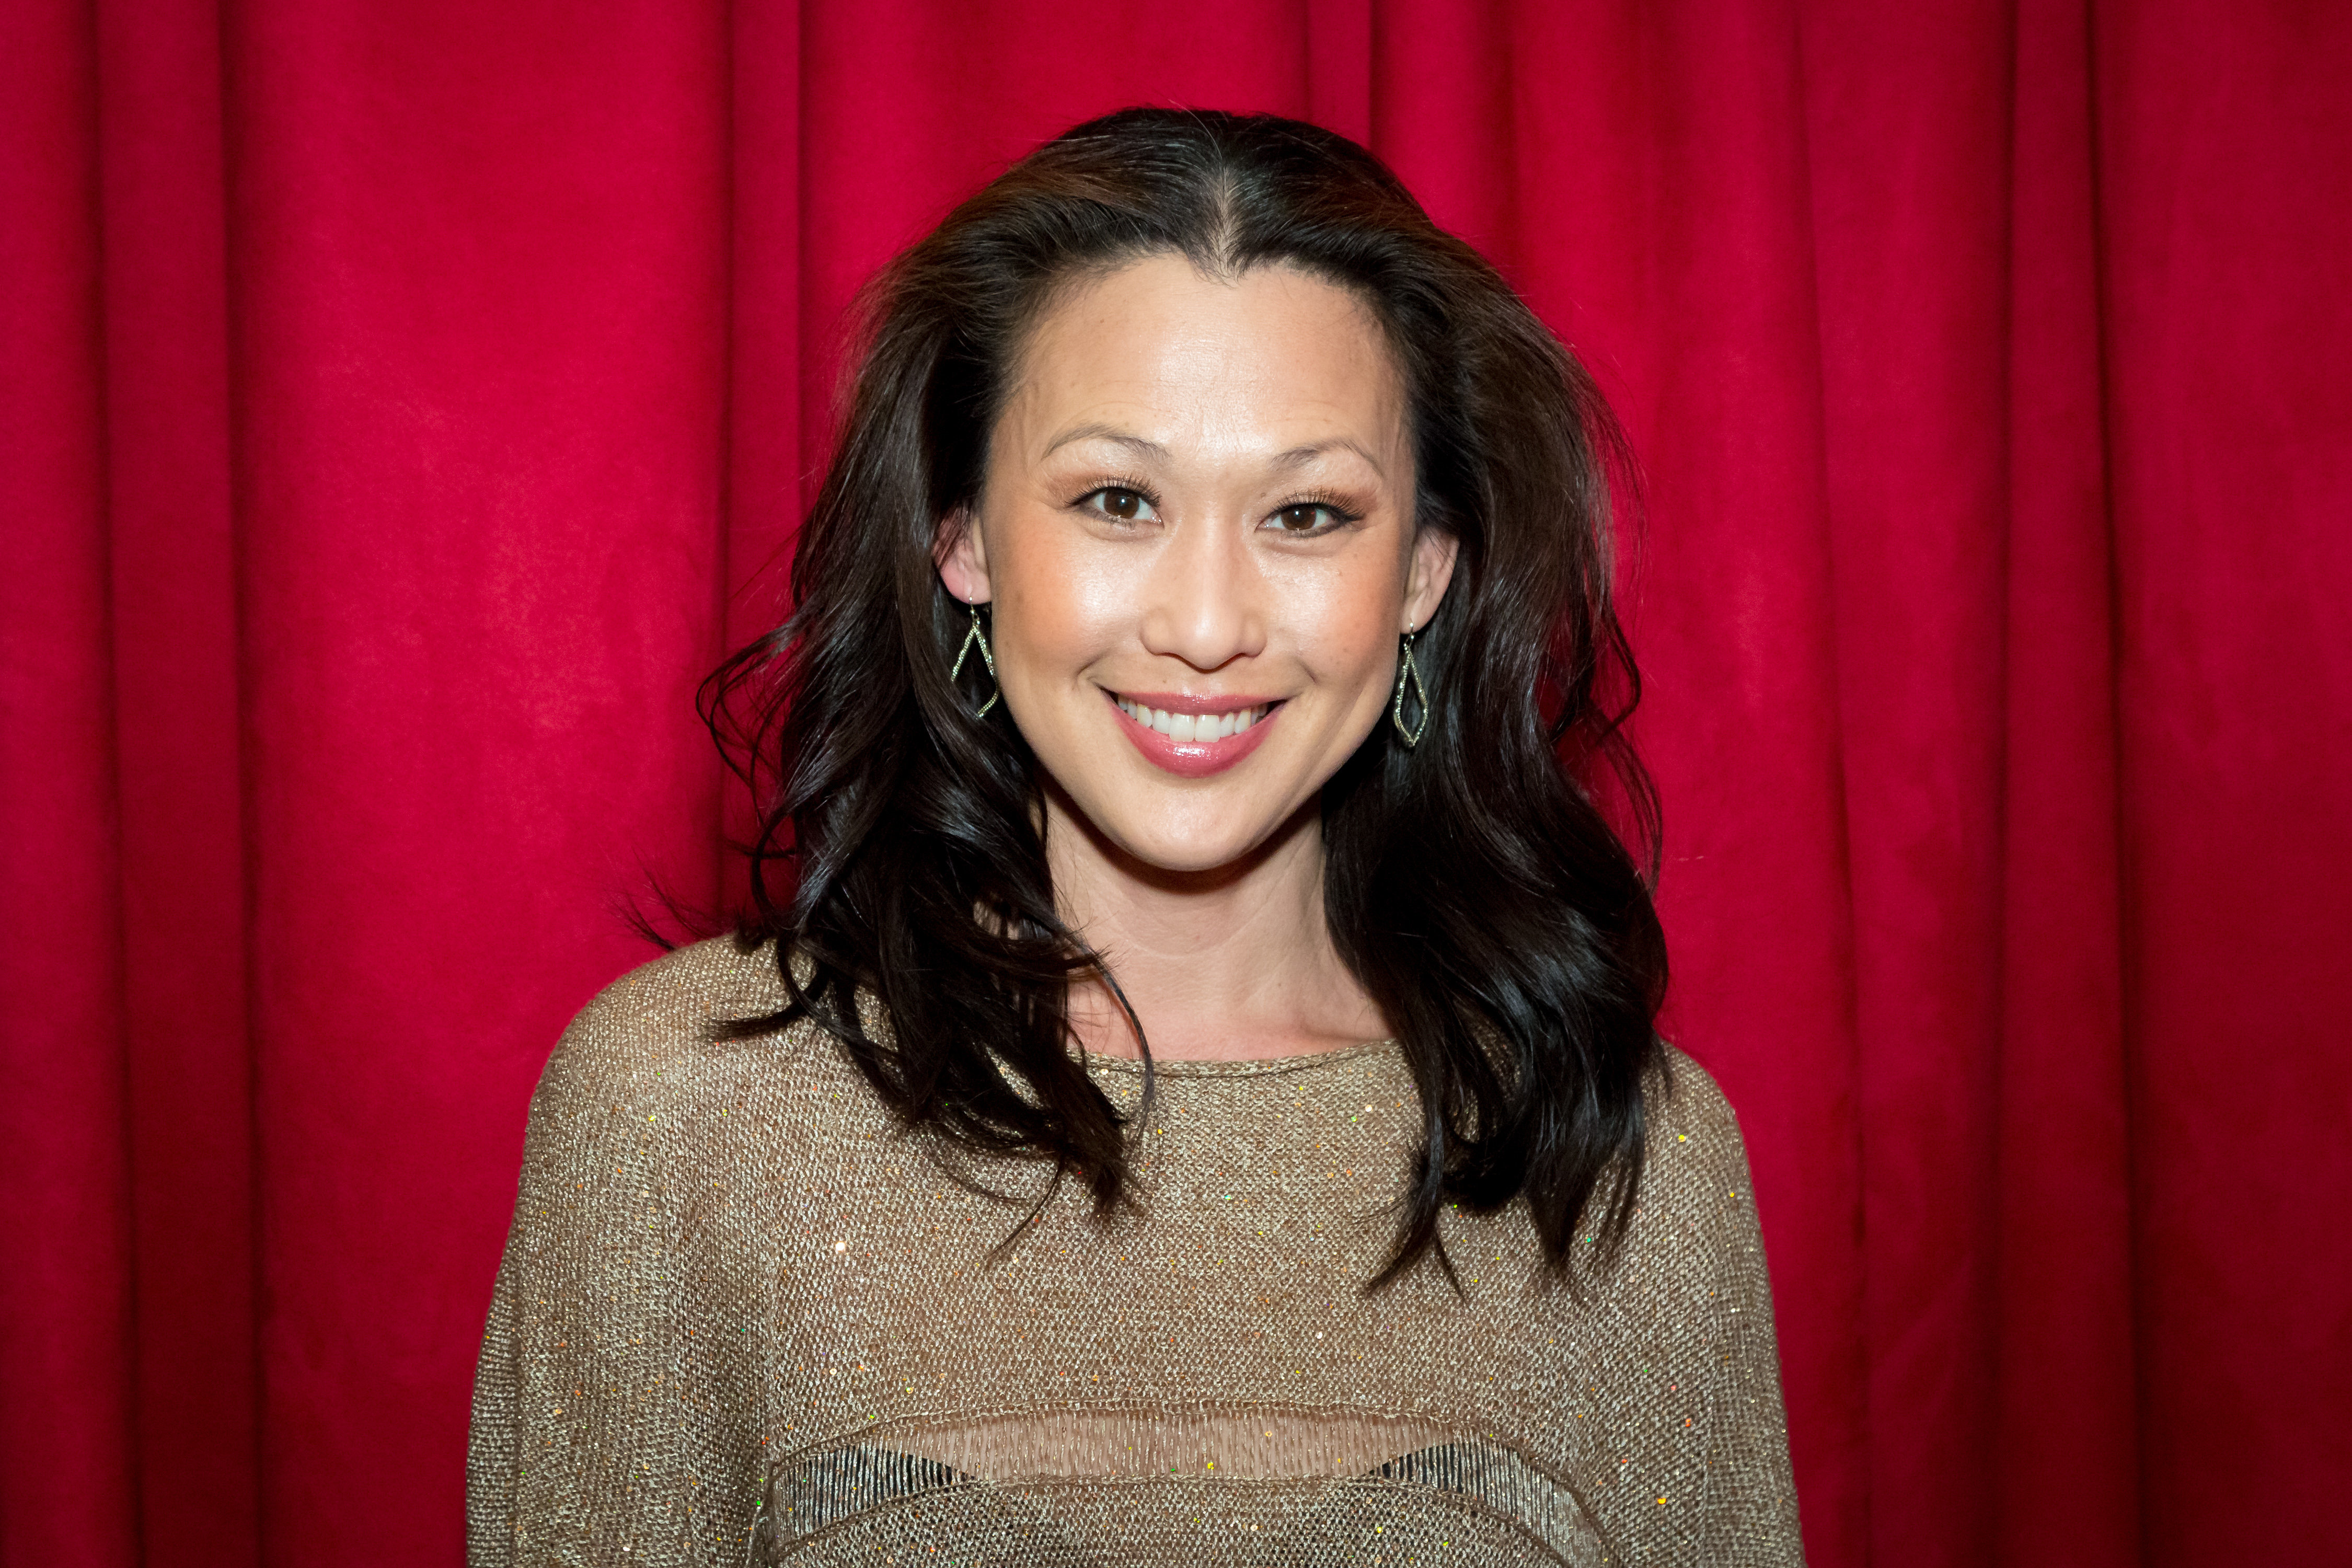 Nicole Bilderback, The Asian Friend Of 90s Teen Comedies, Is Ready To Kick Your Ass HuffPost Entertainment pic